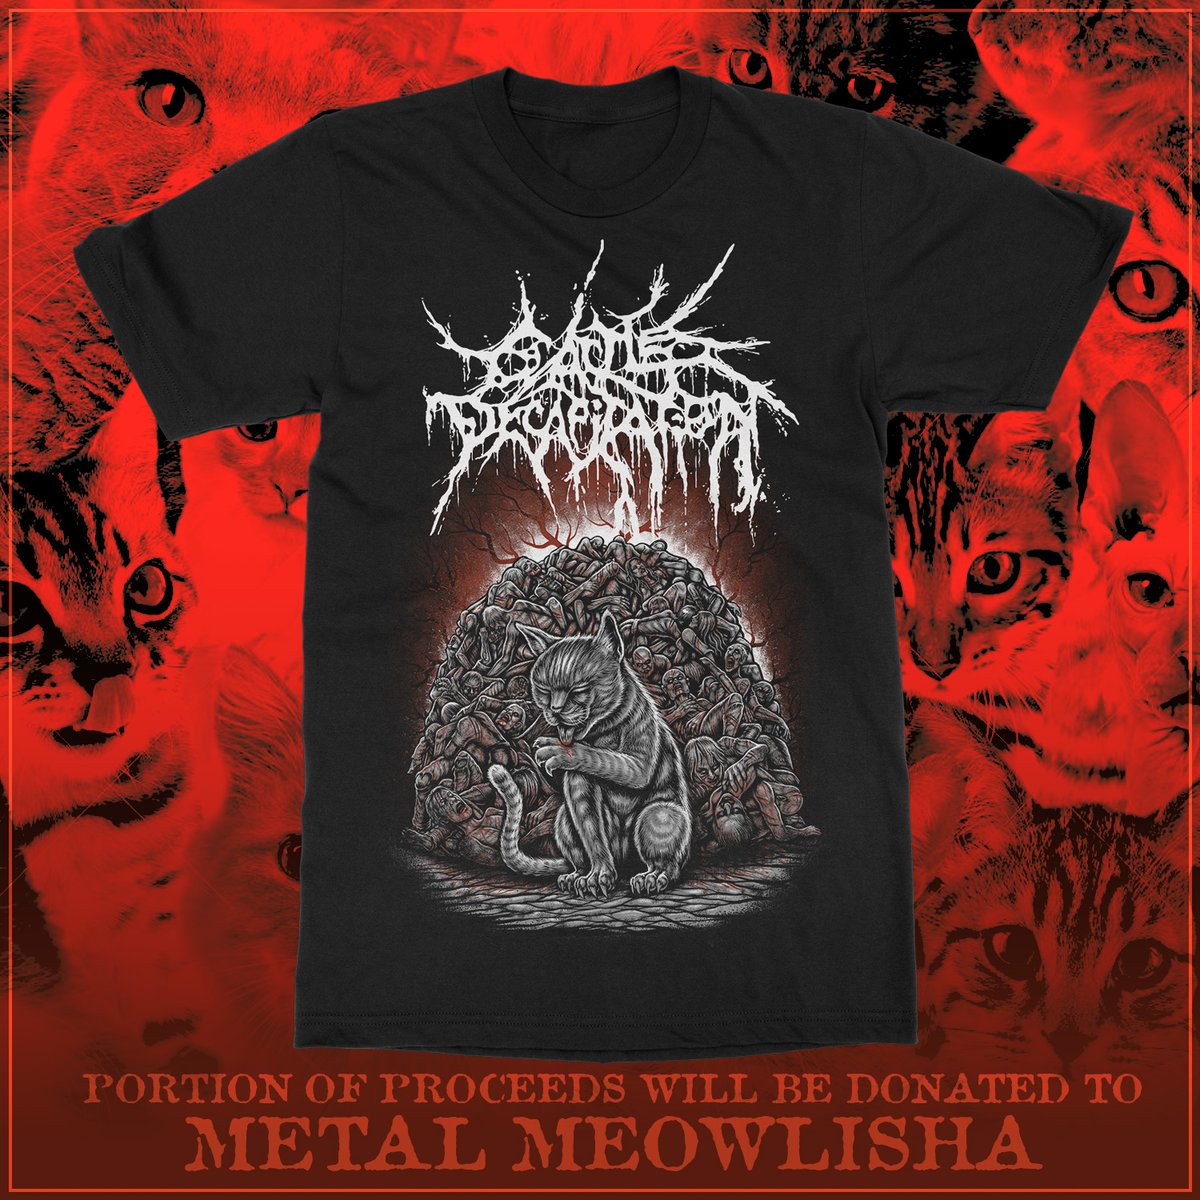 The 'Feline Intervention' T-Shirt AVAILABLE FOR ONE WEEK ONLY! PRE-ORDERS CLOSE ONE WEEK FROM TODAY ON OCT 19th! GET YOURS NOW! 50% of the profit from the sale of this shirt will go to METAL MEOWLISHA, run by Donald Tardy of @obituarytheband GET IT HERE: indiemerch.com/cattledecap/it…